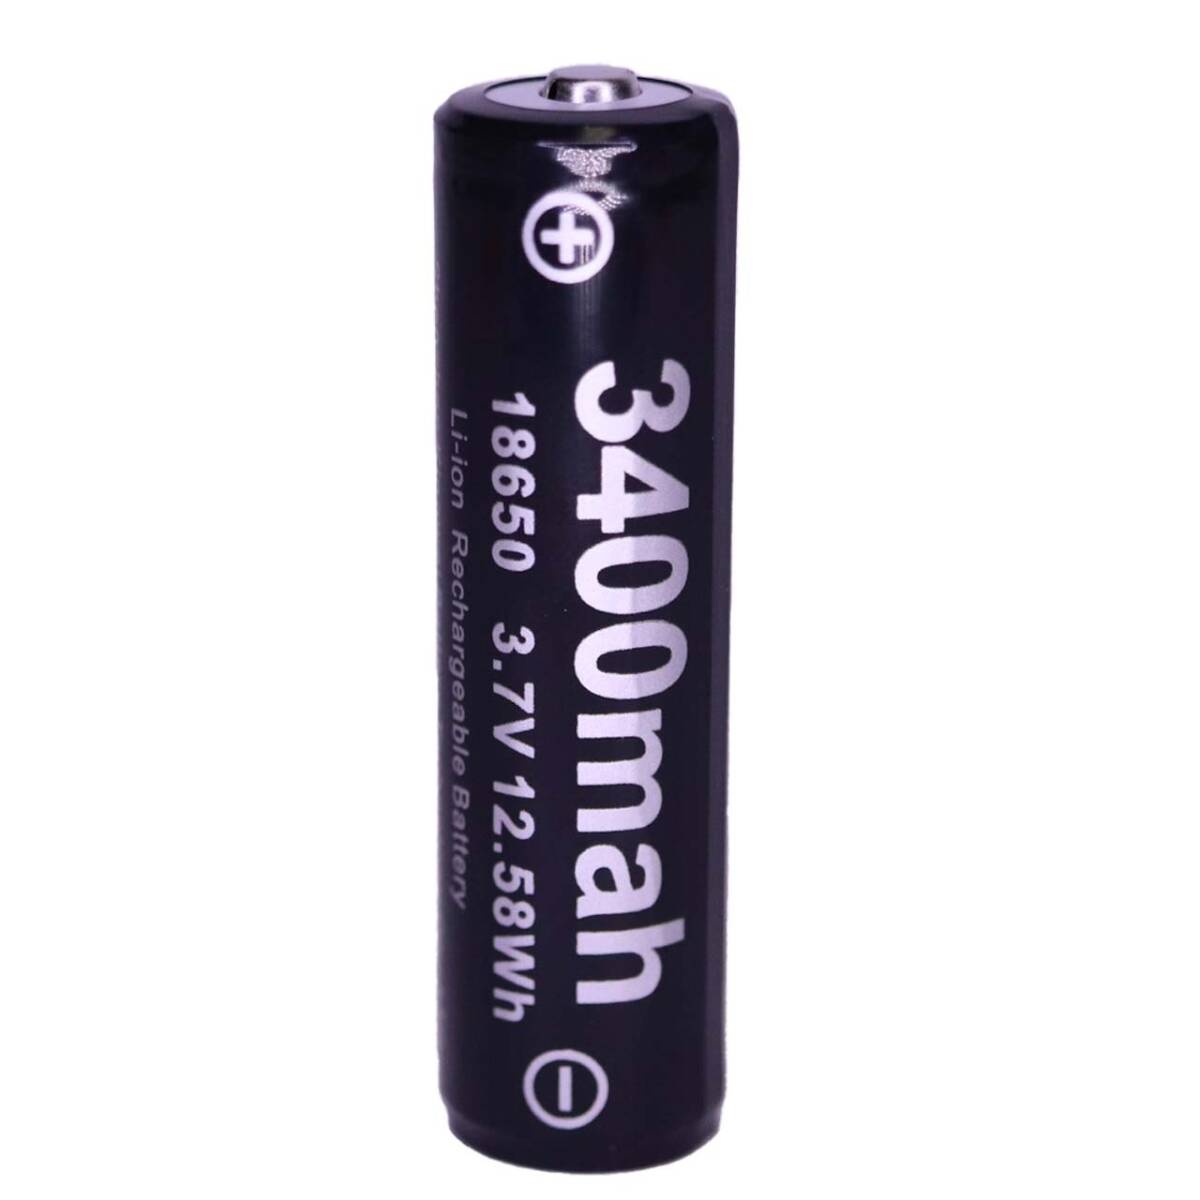 18650 lithium ion rechargeable battery battery PSE protection circuit flashlight head light handy light 3400mah 01